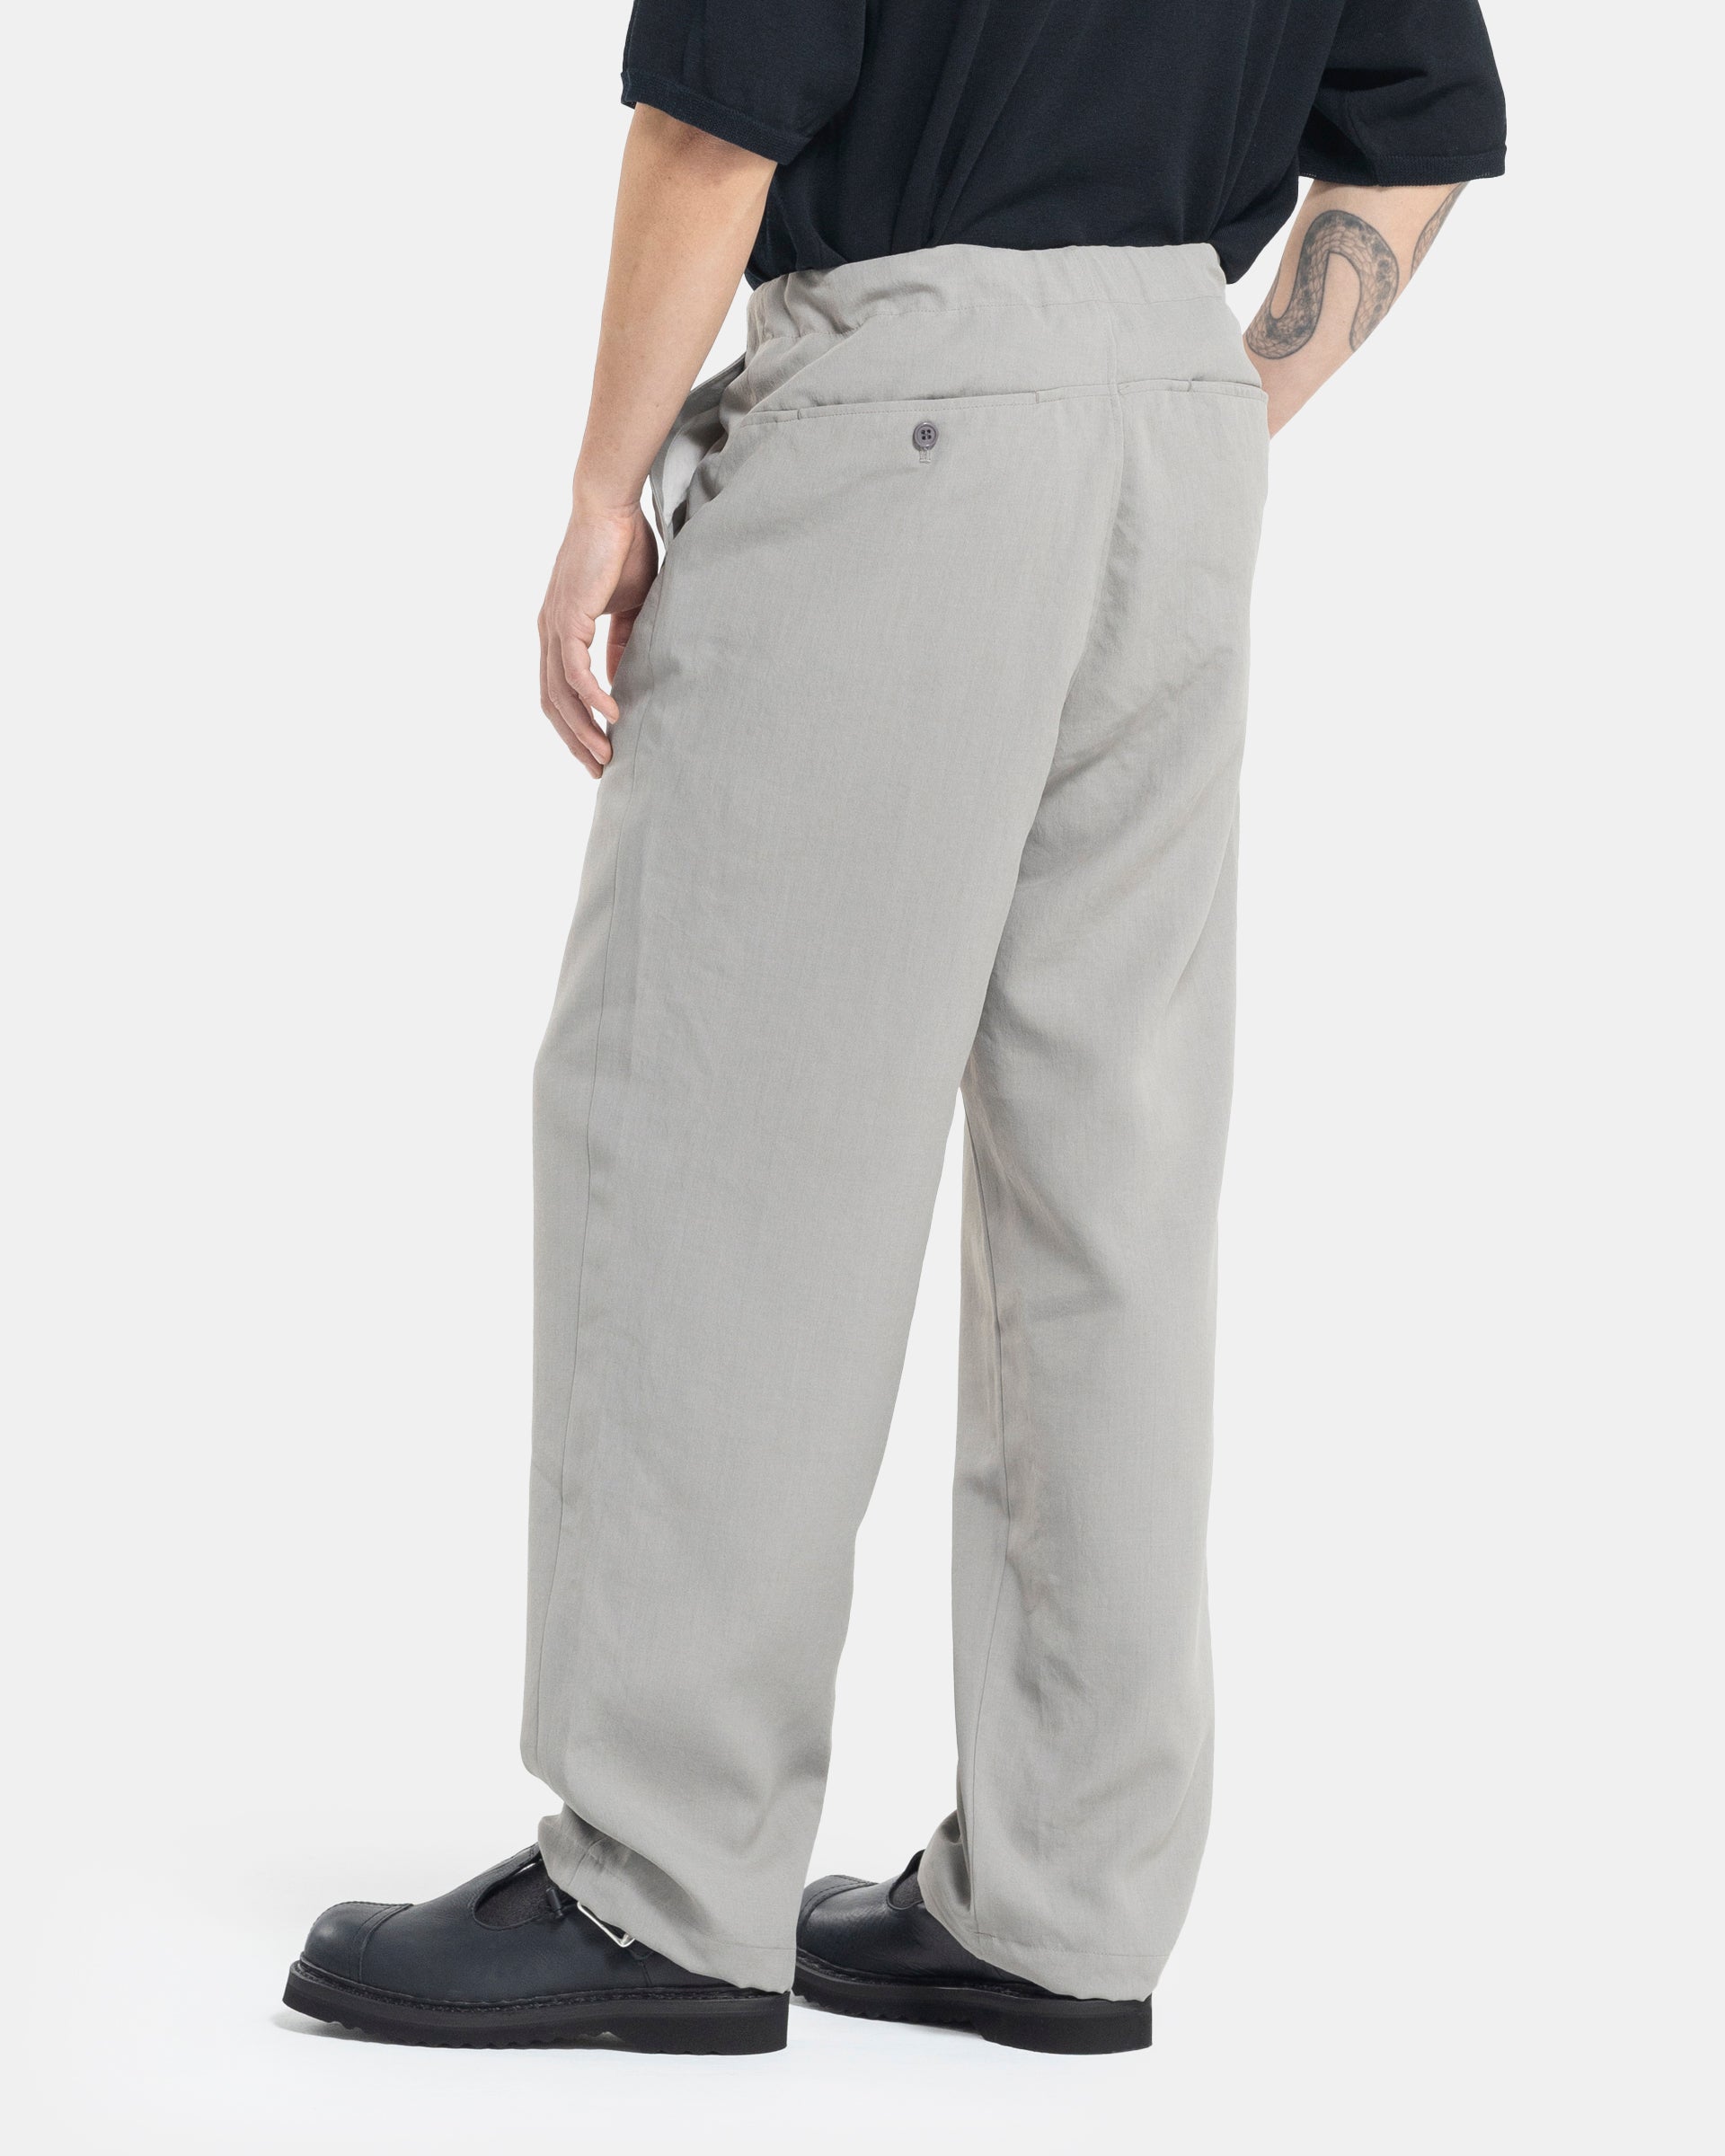 Male model wearing grey Still By Hand trousers on white background